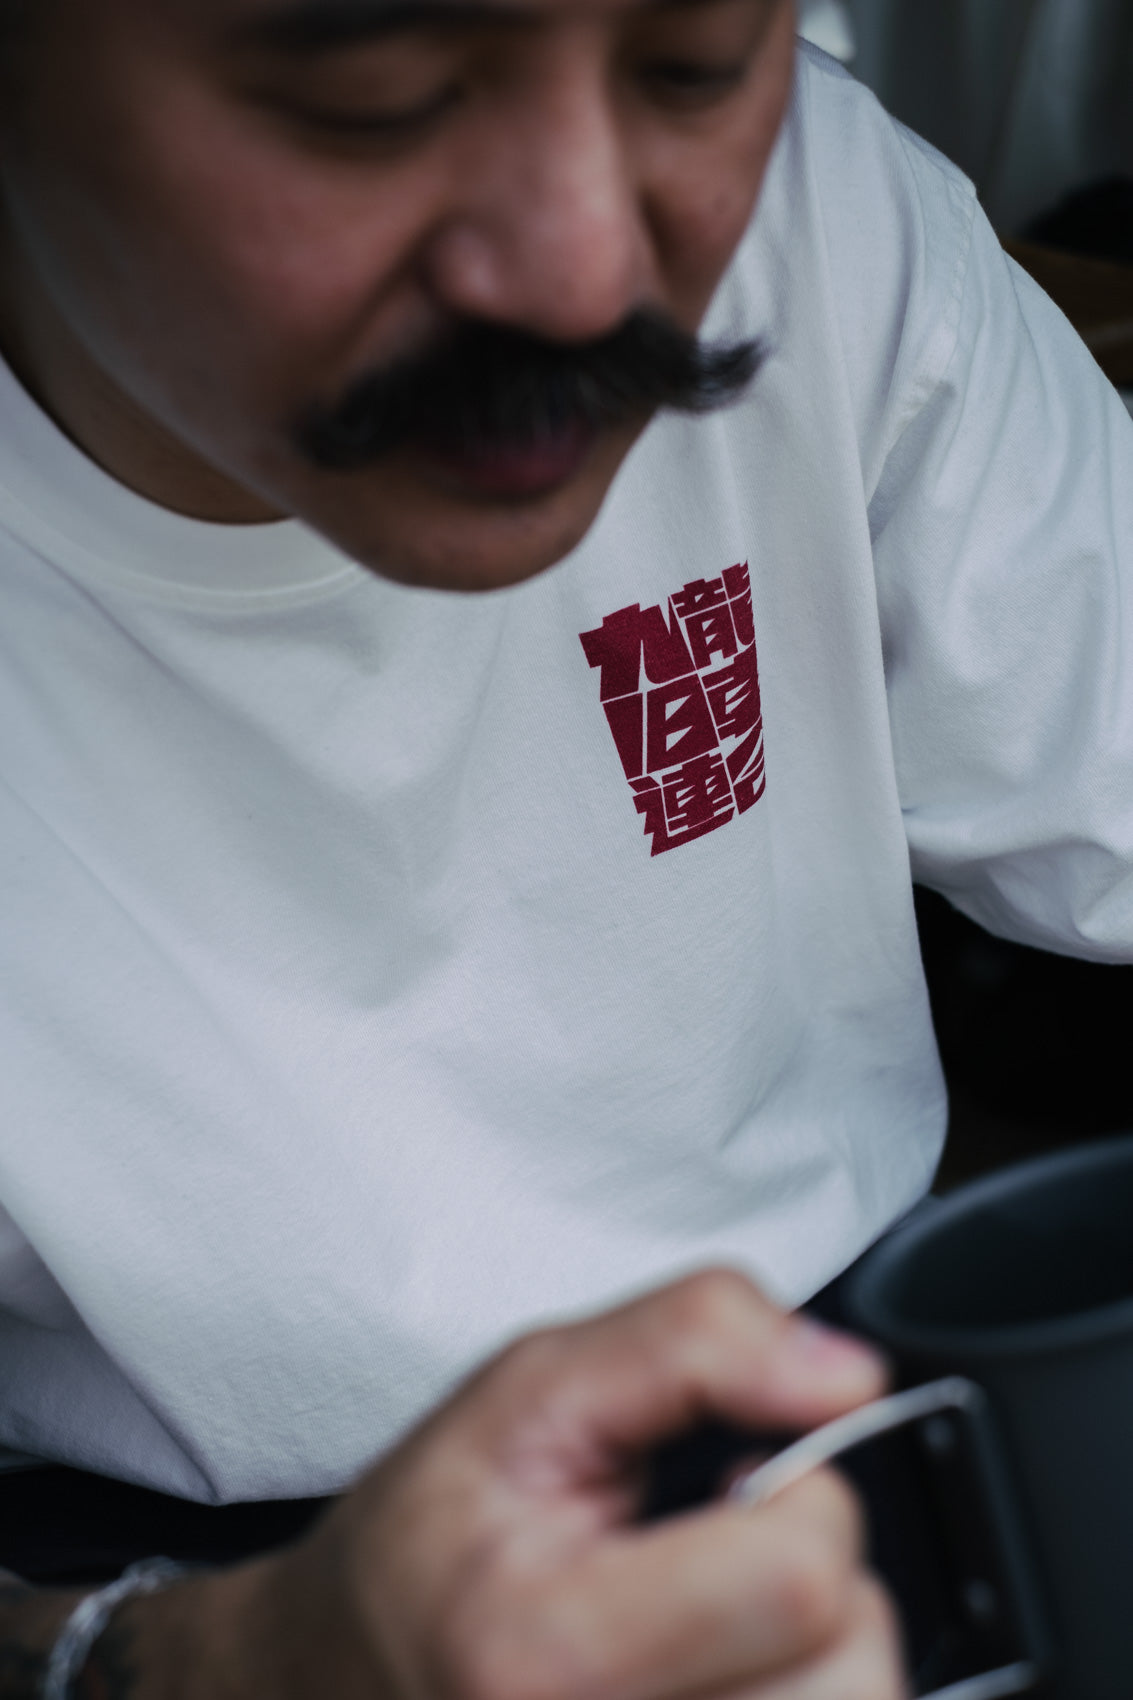 KBCC Crew Heavy Washed Tee / White